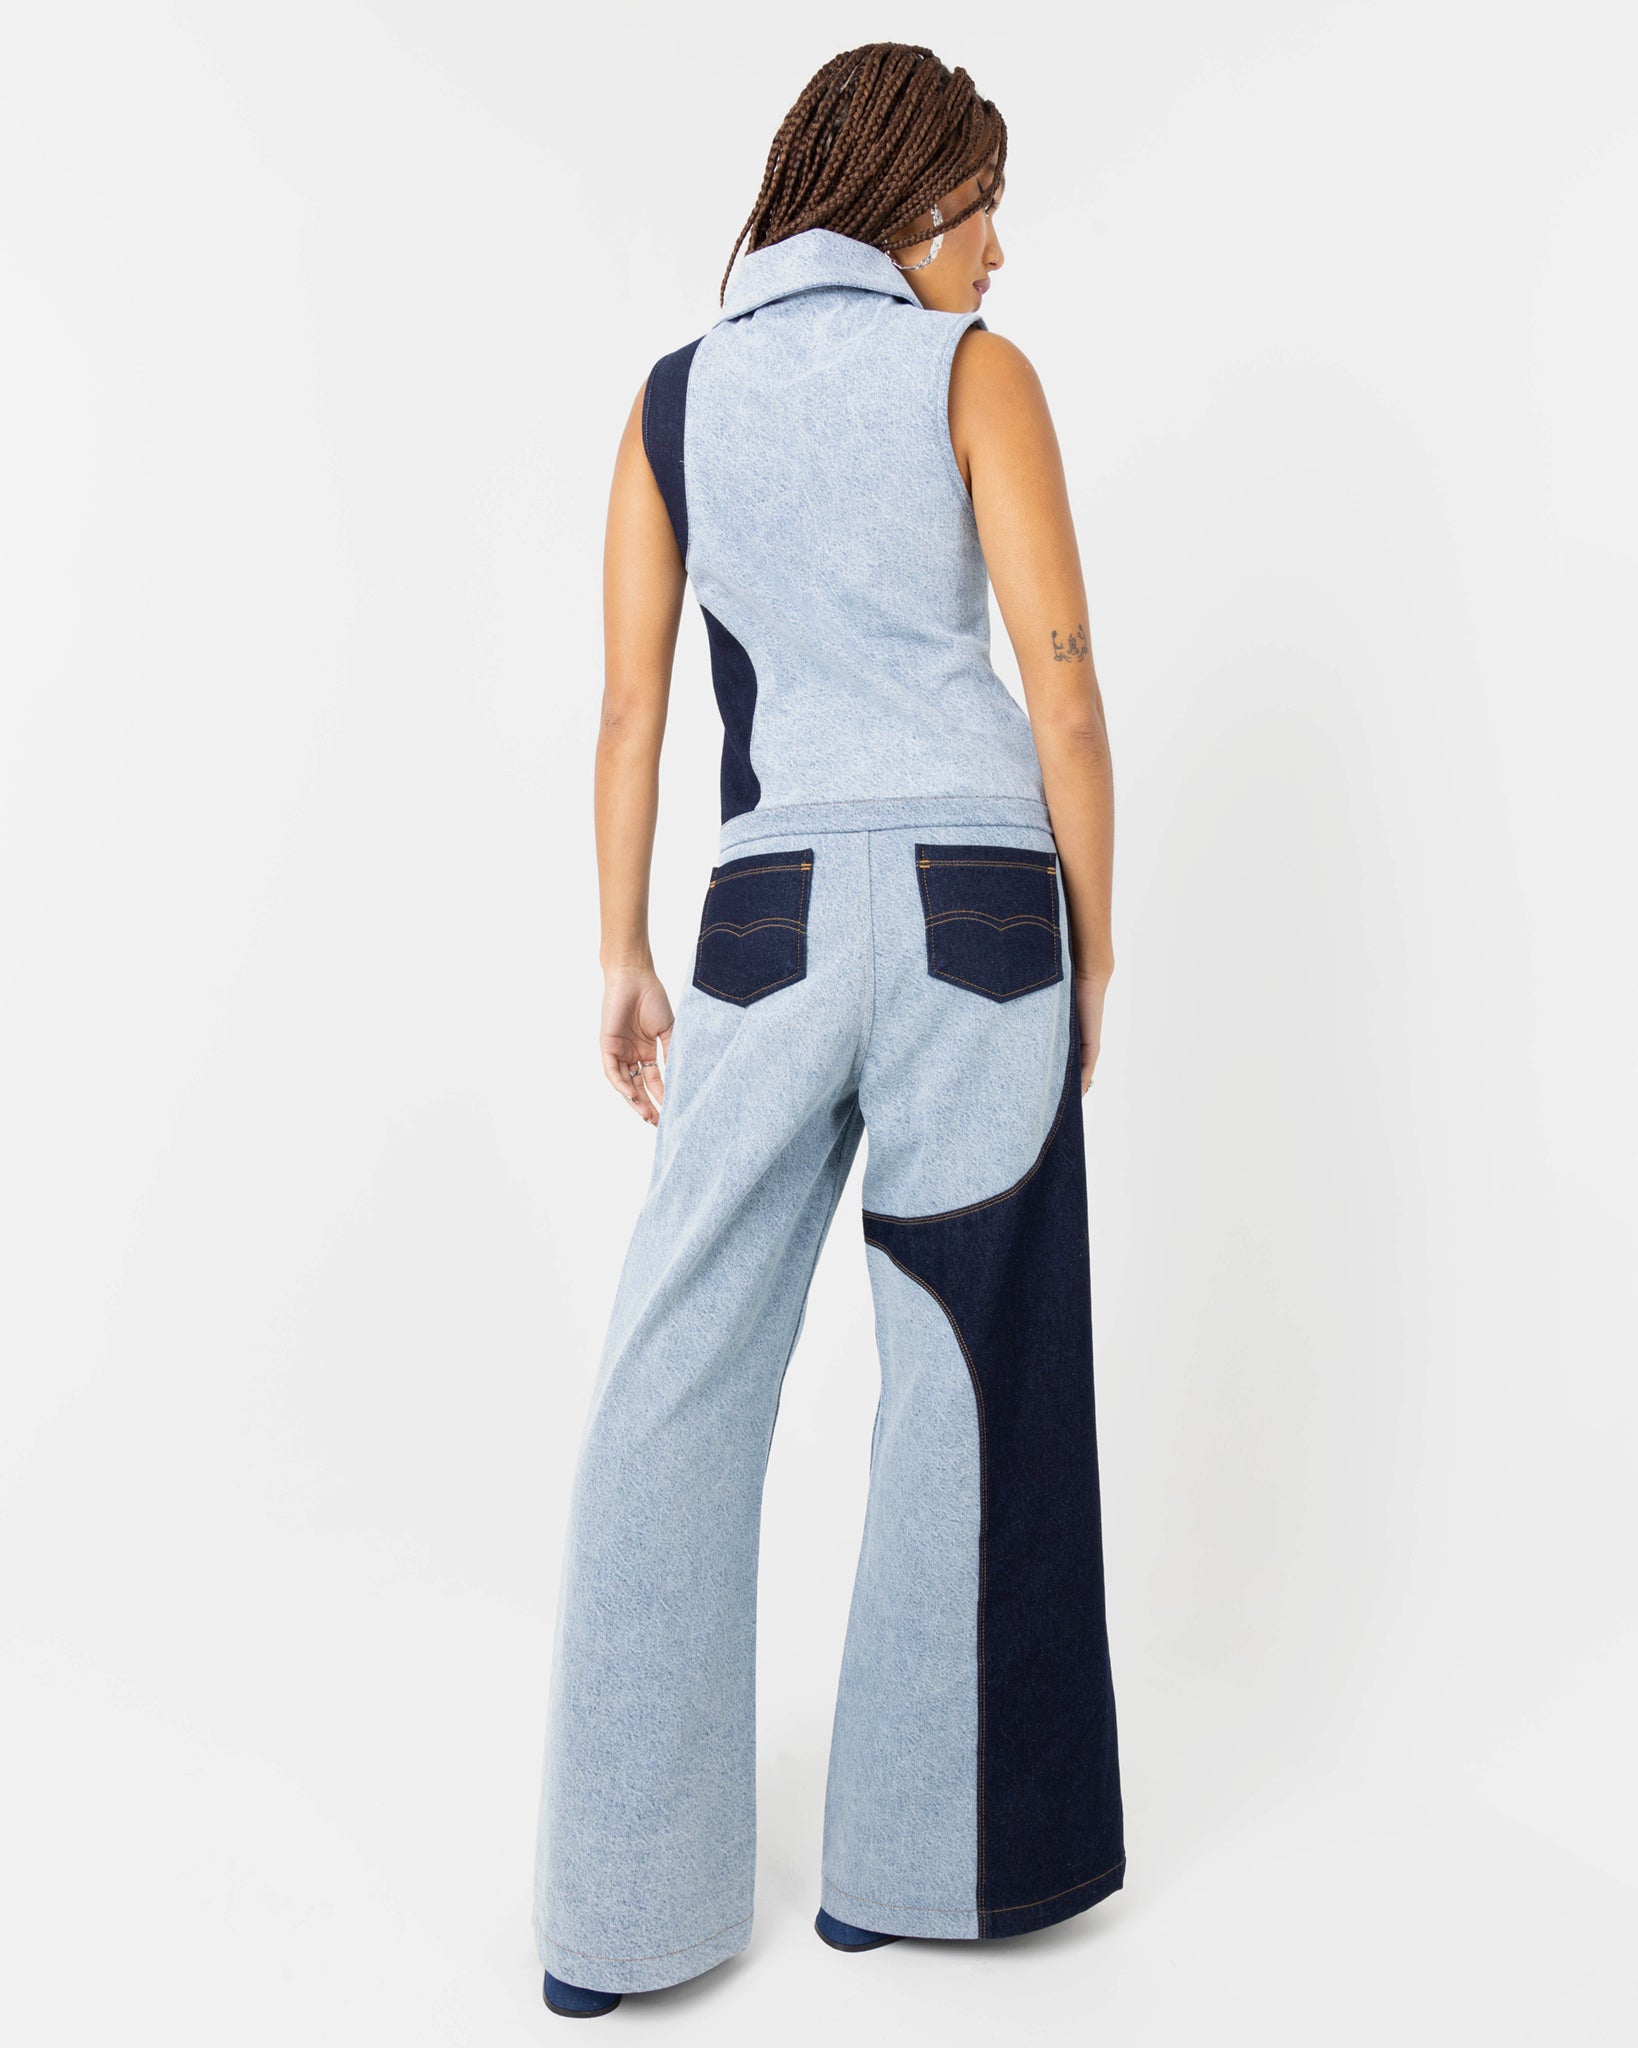 Lost & Found Co-Ord Denim Patchwork Gilet In Blue